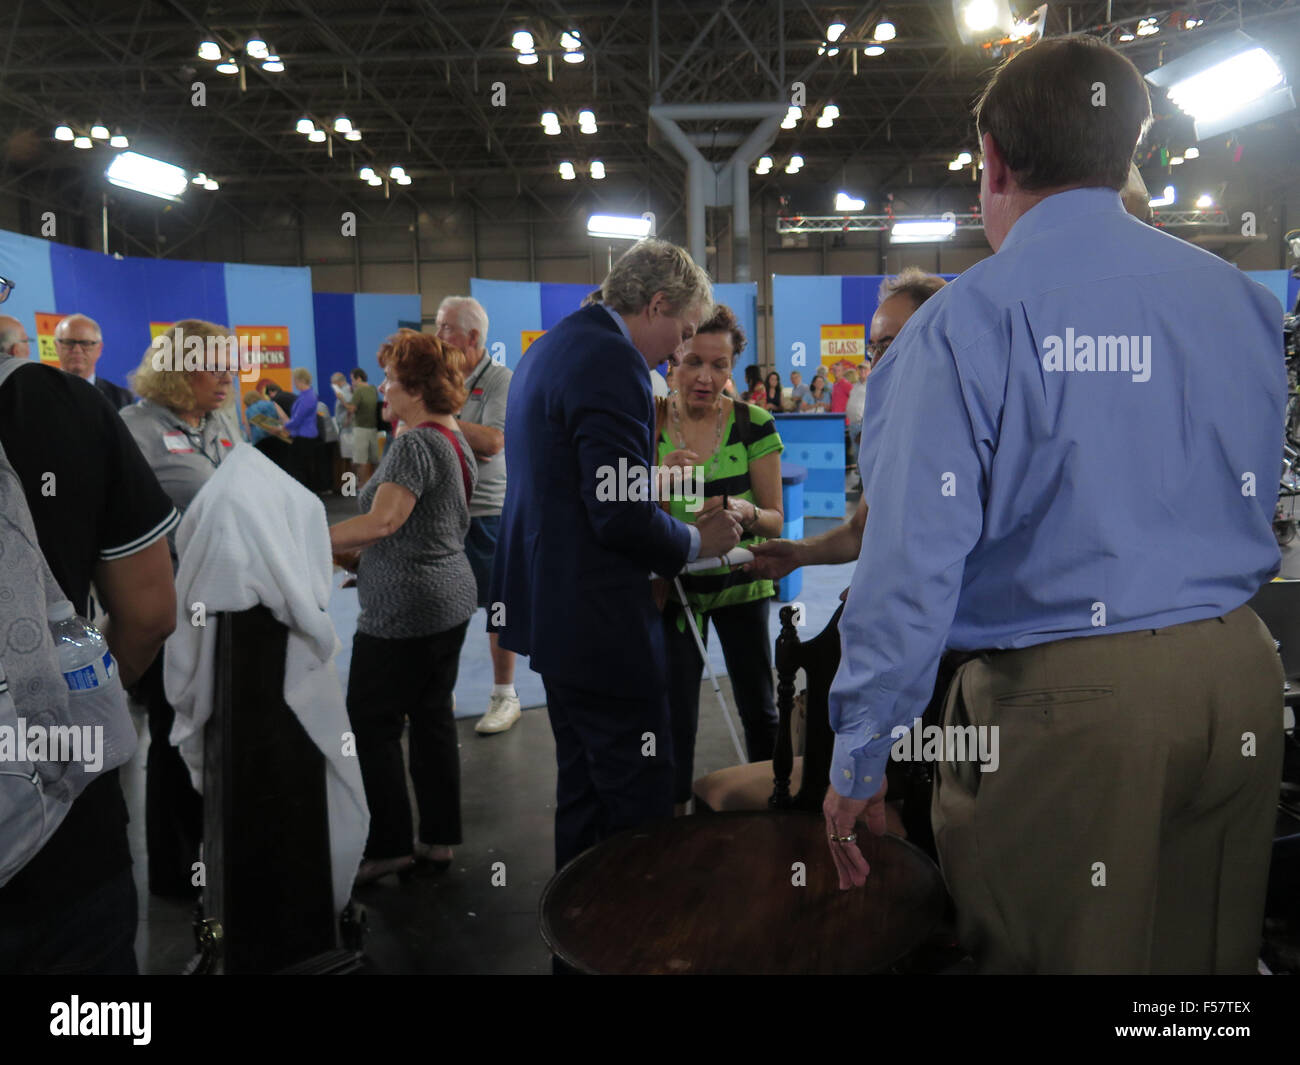 Antiques Roadshow during filming at the Javits Center in New York City, with one of Keno brothers signing autograph. Stock Photo